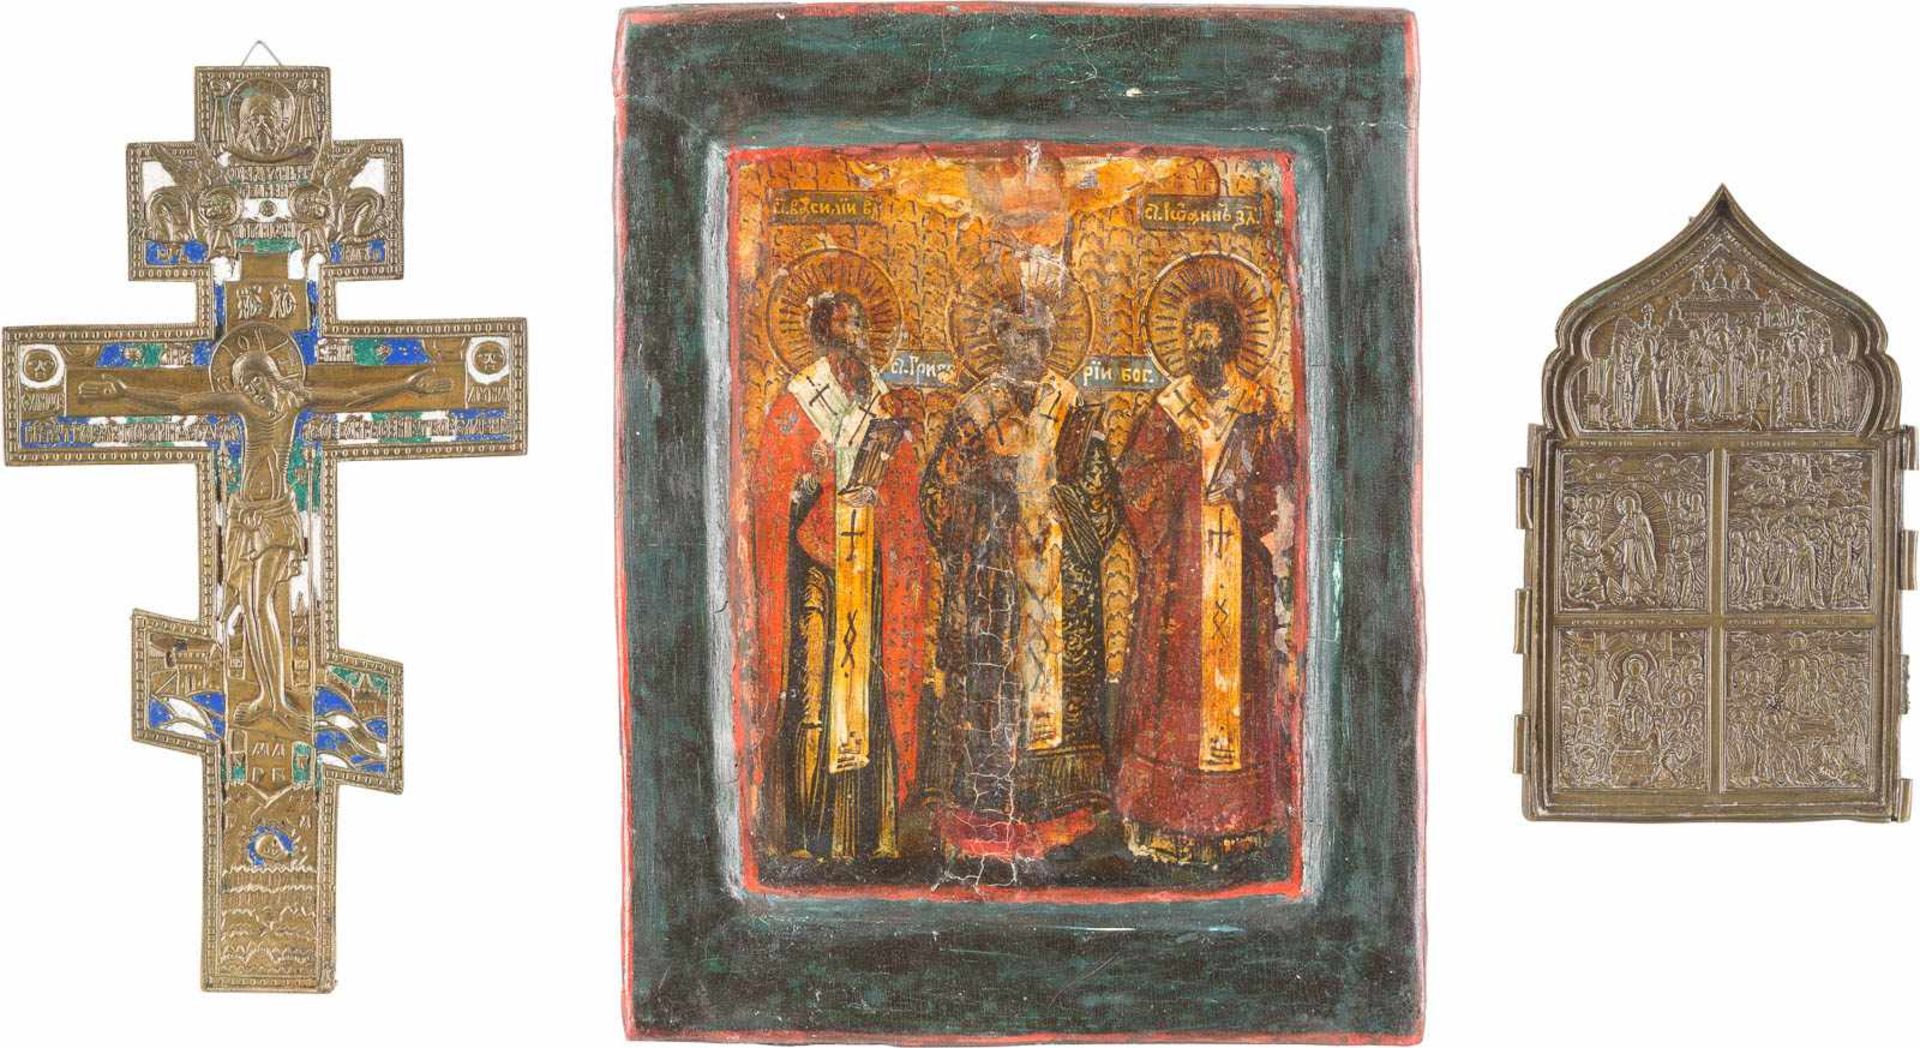 A SMALL ICON SHOWING THE THREE HIERARCHS OF ORTHODOXY, A BRASS CRUCIFIX AND A BRASS